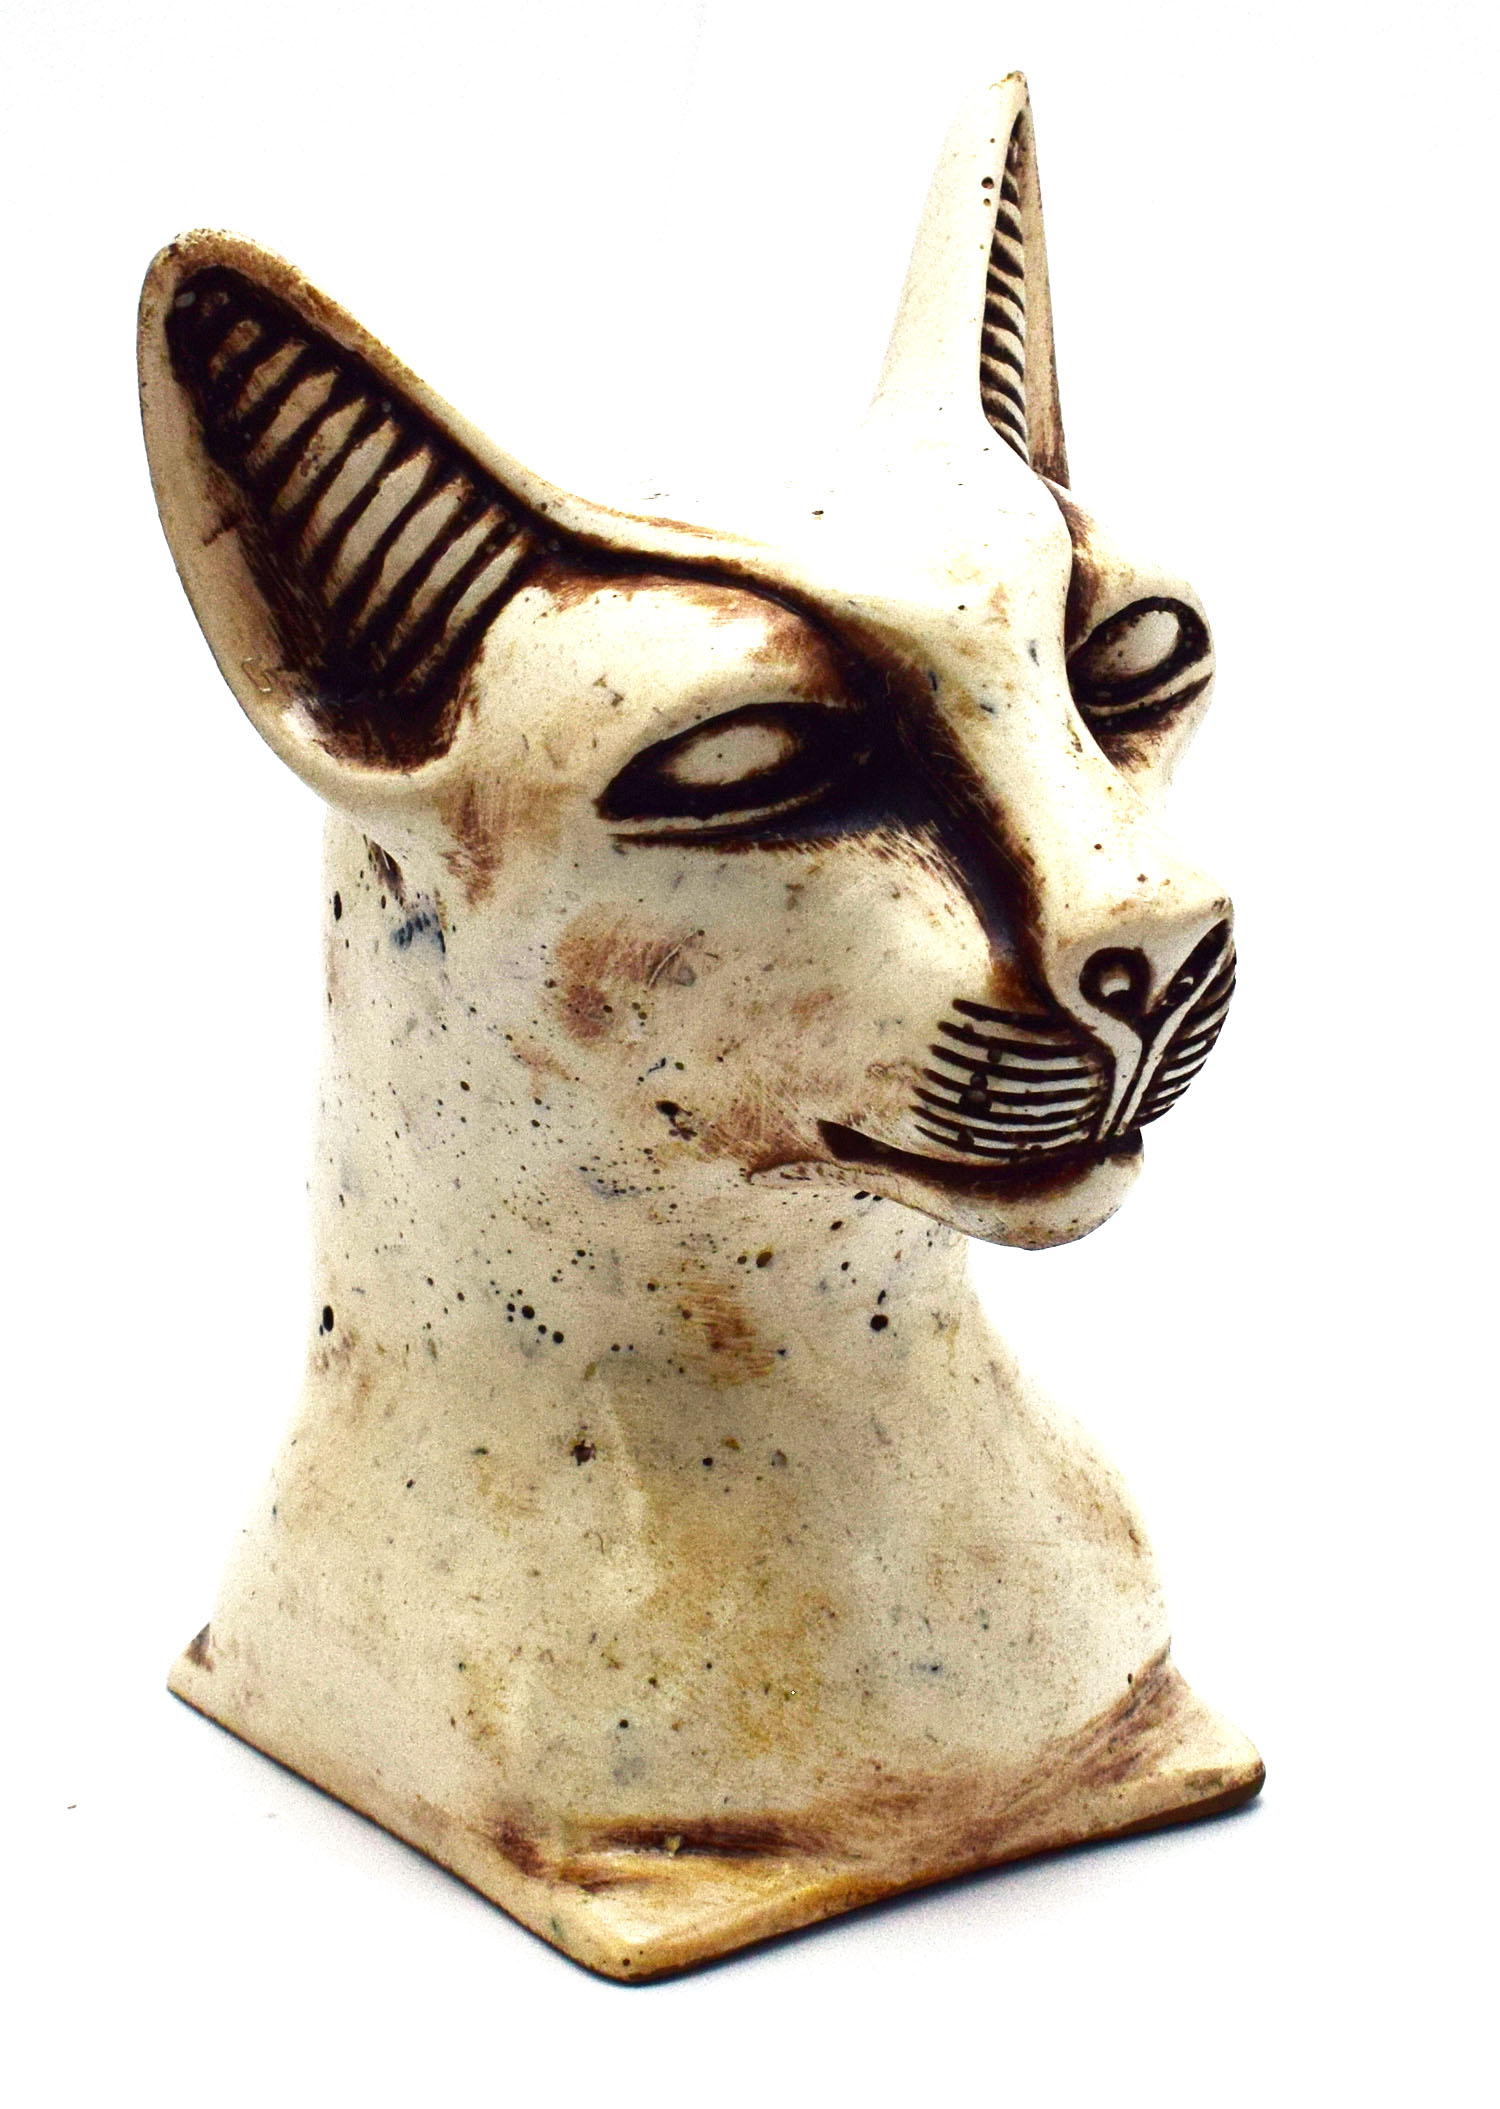 immatgar pharaonic Egyptian cat bastet Head Statue Egyptian souvenirs gifts  for Women Girls and mother ( White - 10.5 CM long )